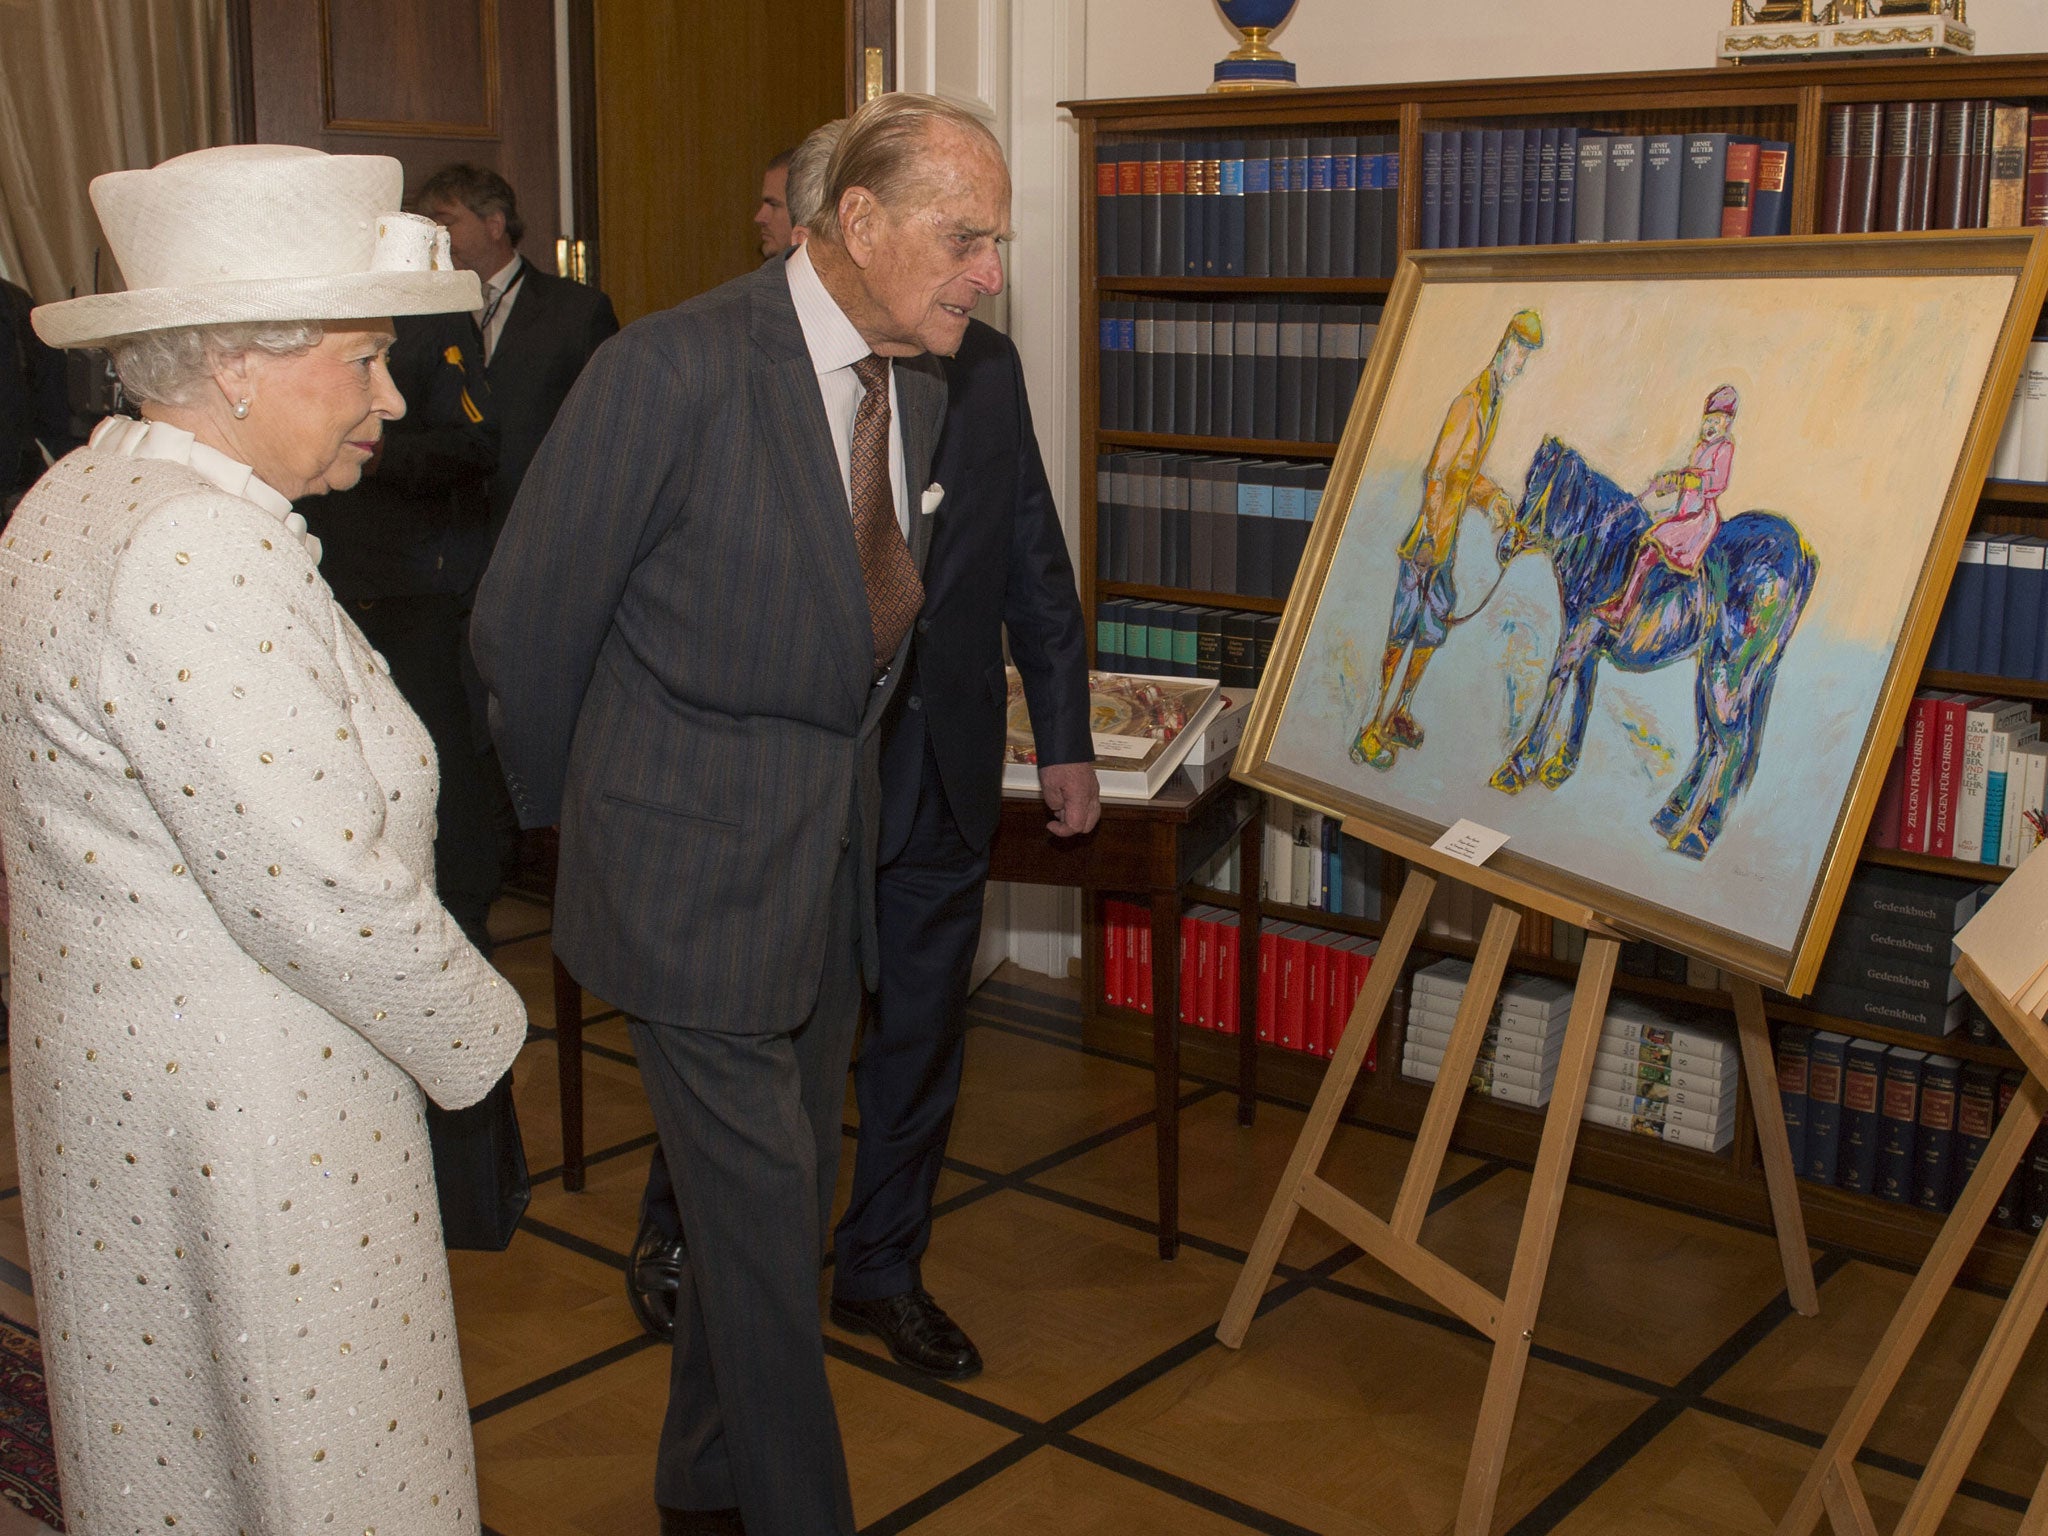 Queen Elizabeth II and the Duke of Edinburgh are presented with a painting by Germany's Federal President Joachim Gauck at his official Berlin residence